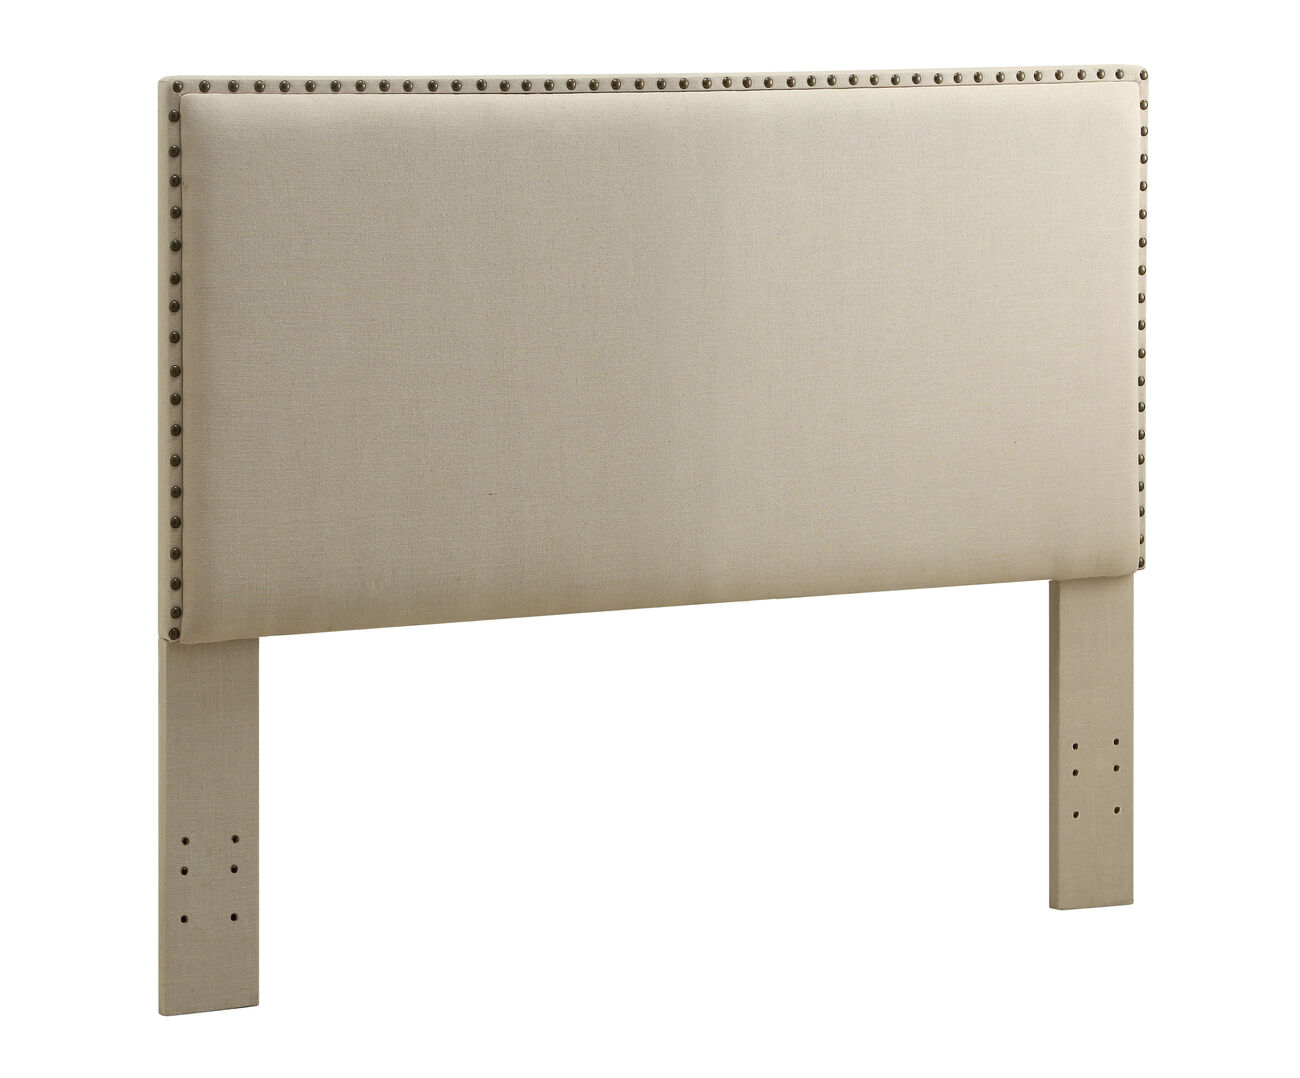 Wooden Full Queen Size Headboard with Nail head Trim Details, Beige